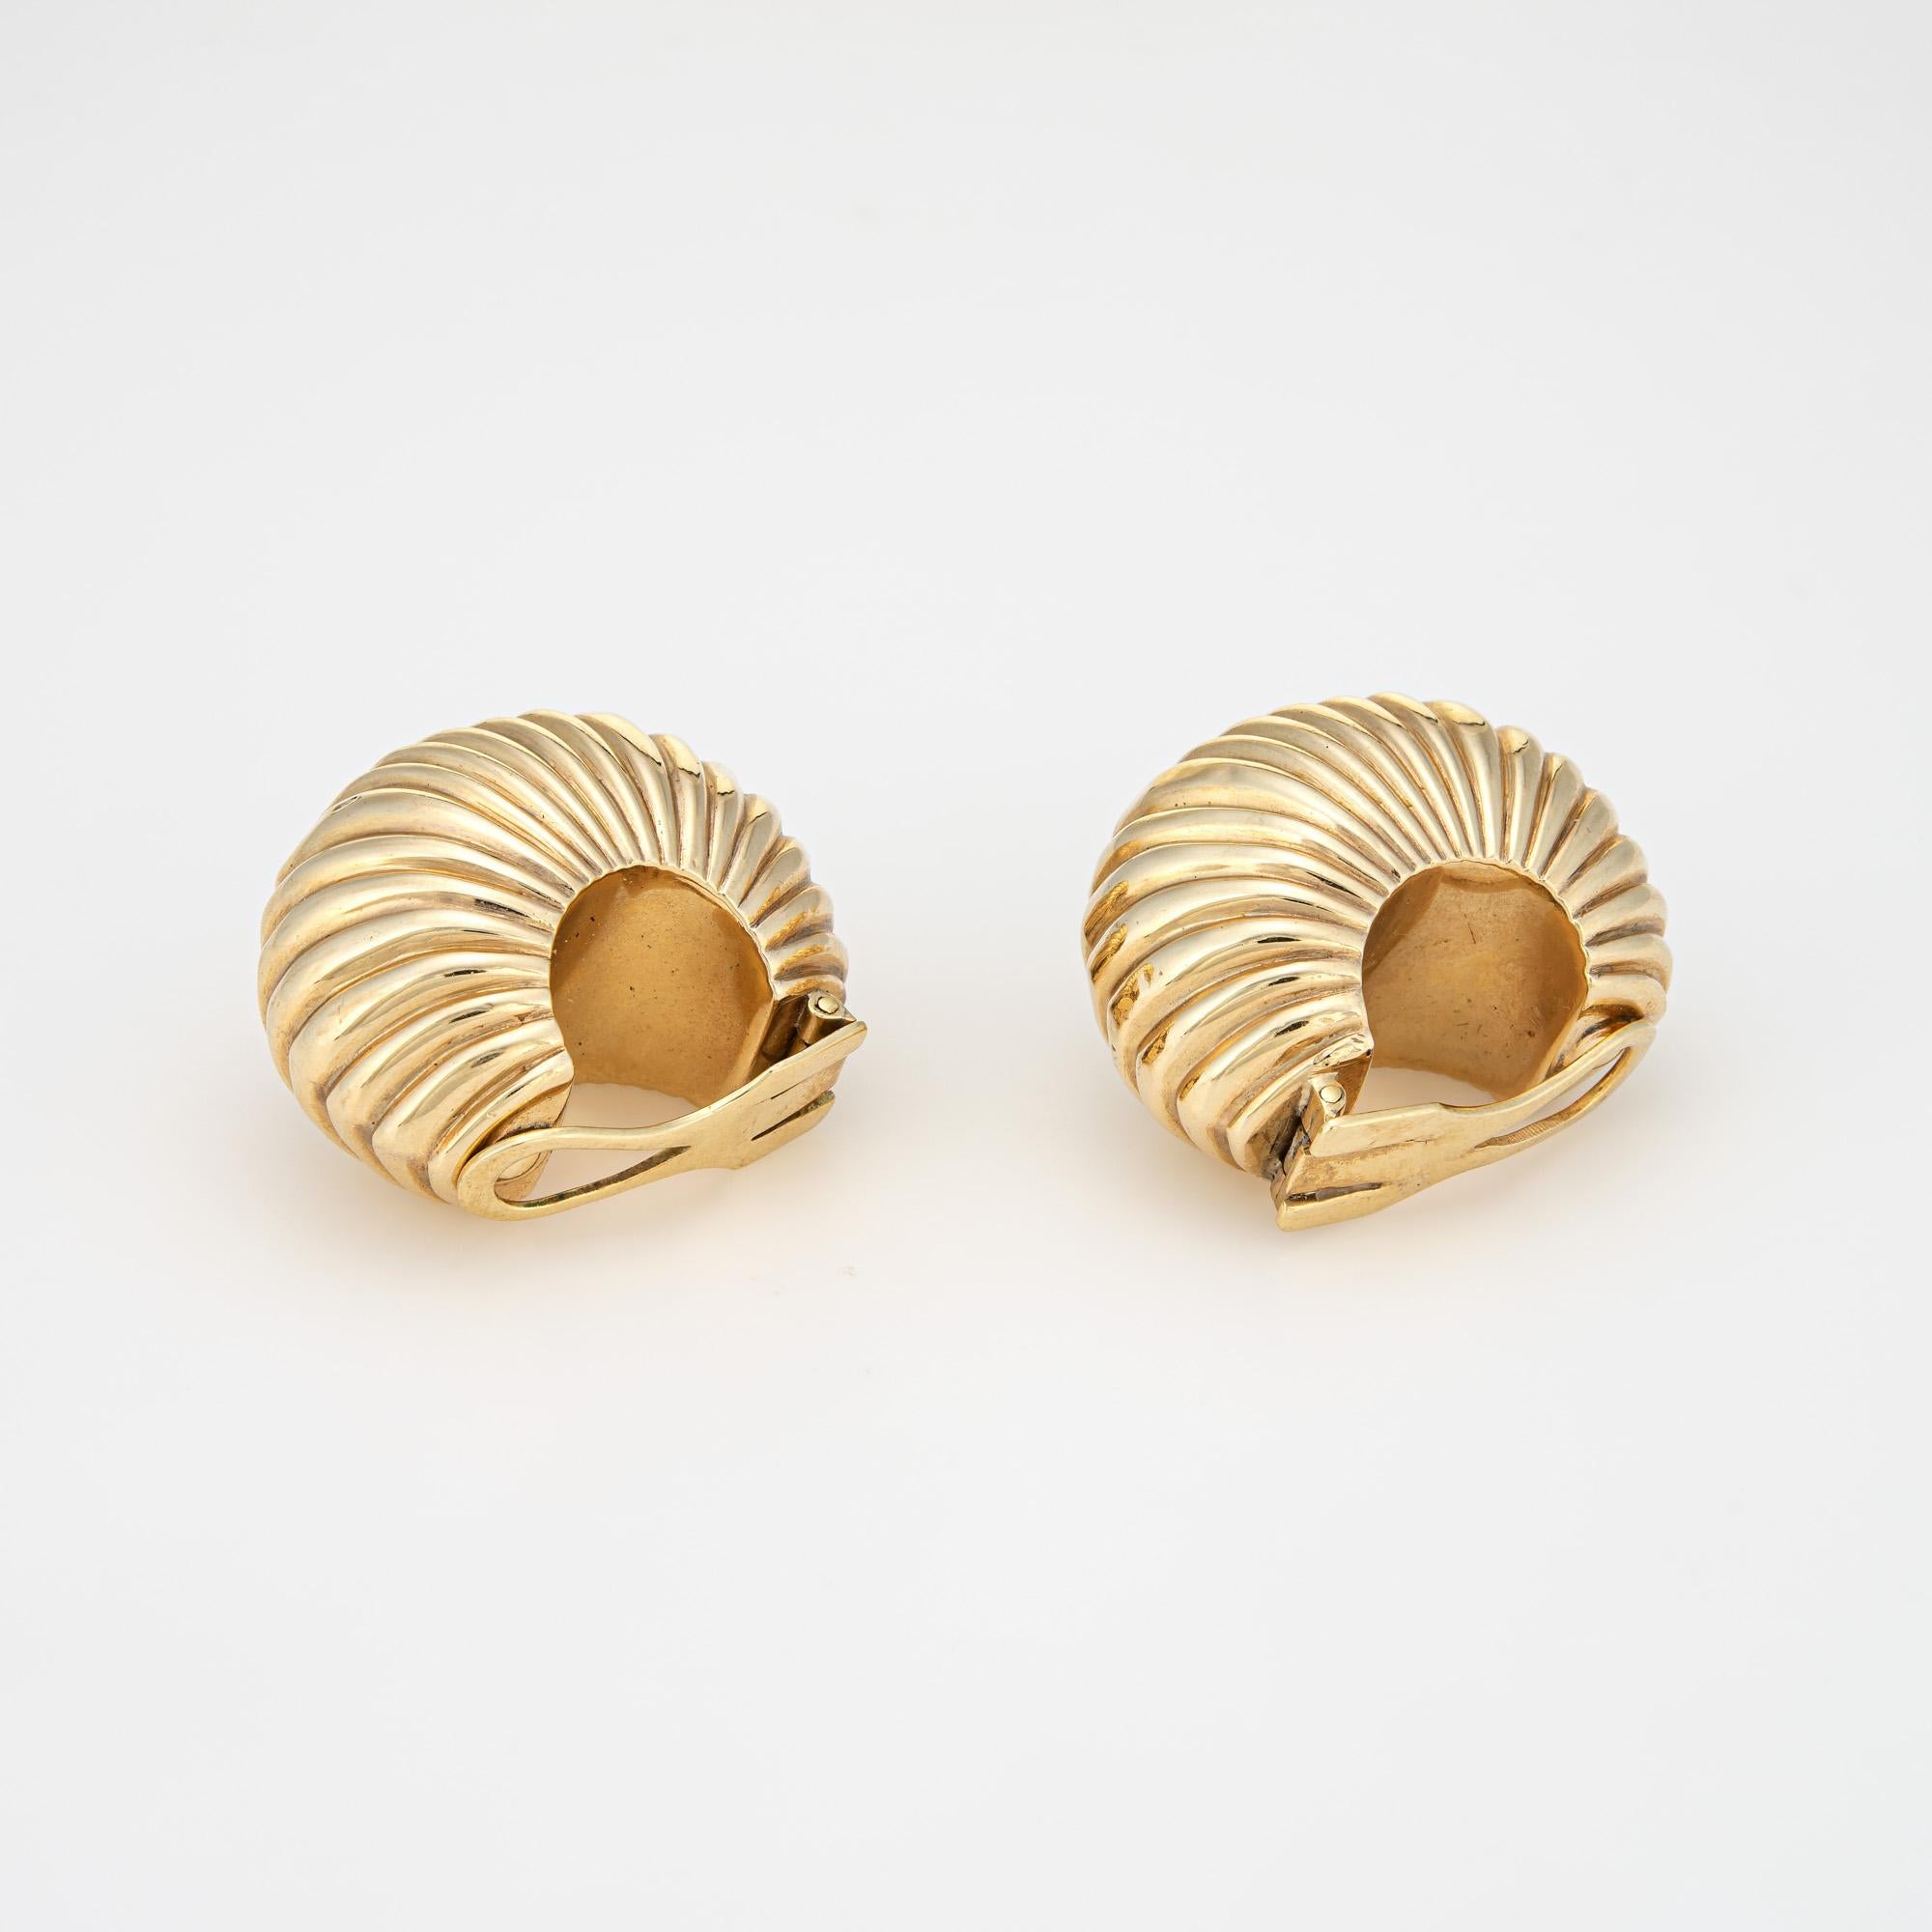 Finely detailed vintage Cartier bombe cocktail earrings (circa 1945) crafted in 14 karat yellow gold. 

The stylish vintage earrings feature a fluted bombe design in a textured shell motif. The whimsical design of the earrings highlights the bold